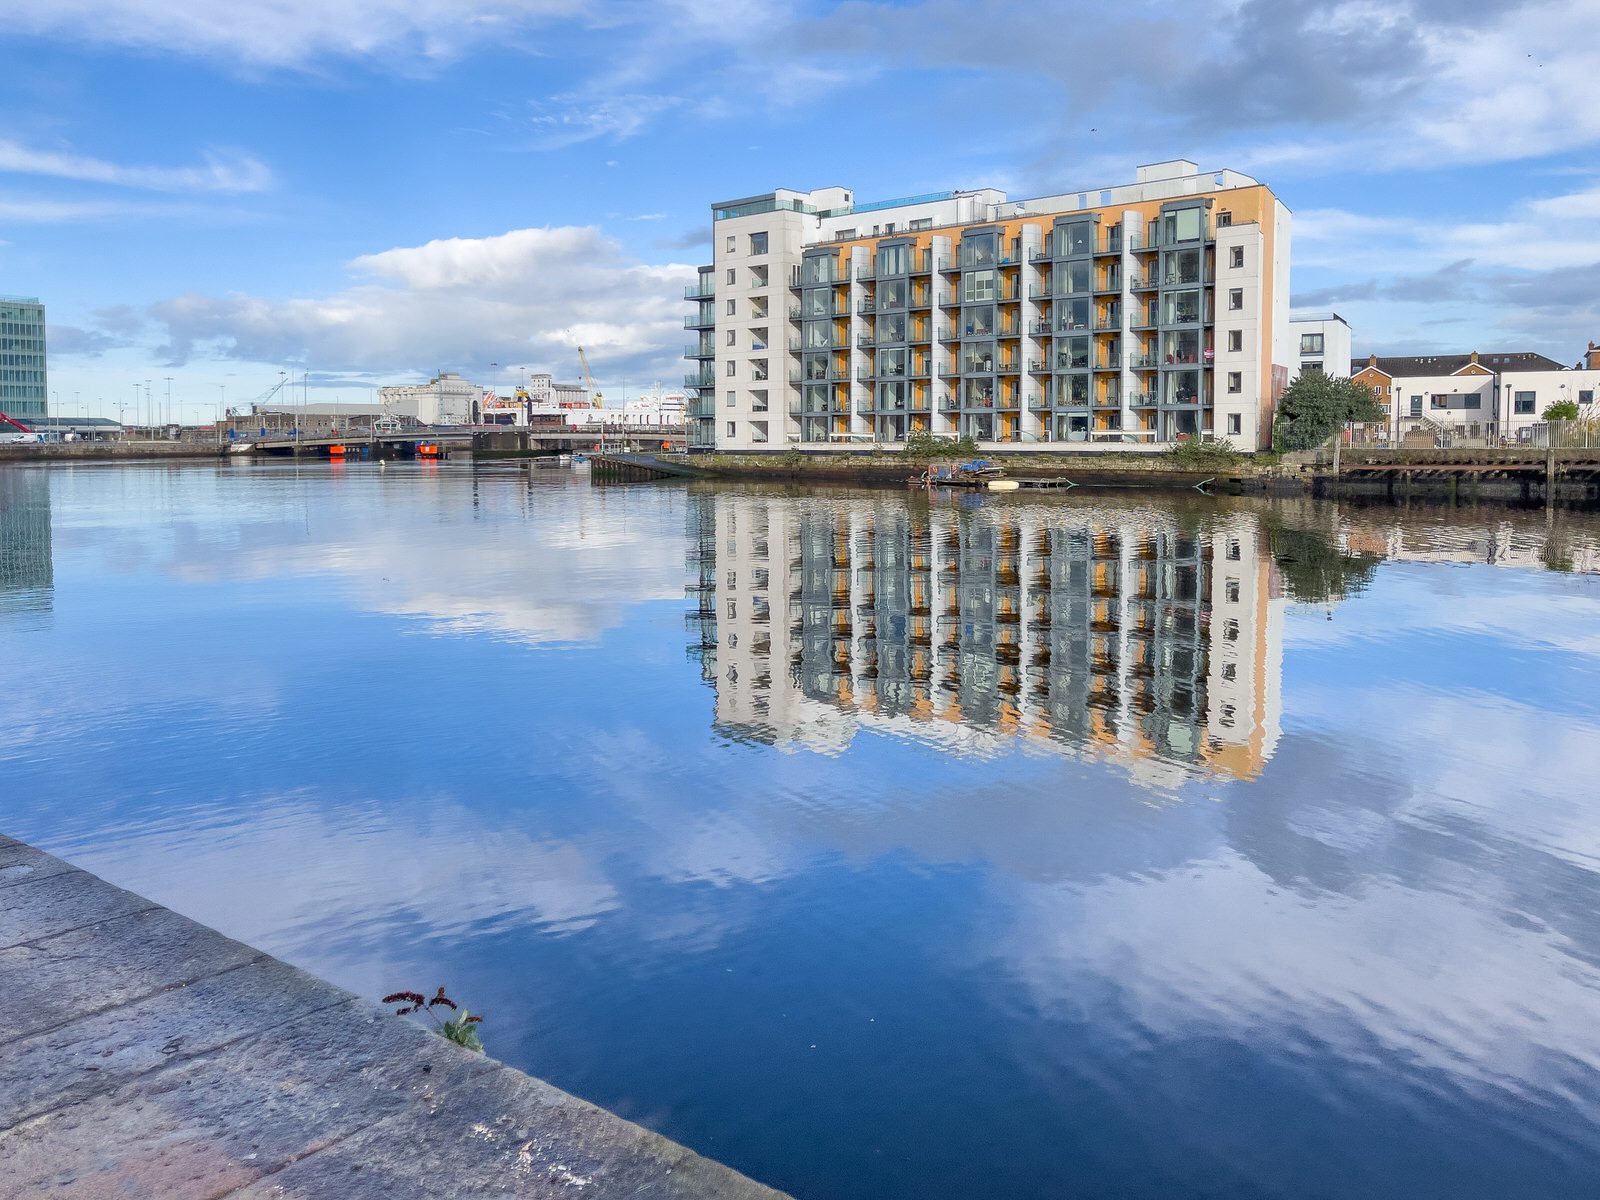 CAPITAL DOCK AND NEARBY - INDEED ARE LOCATED HERE 020